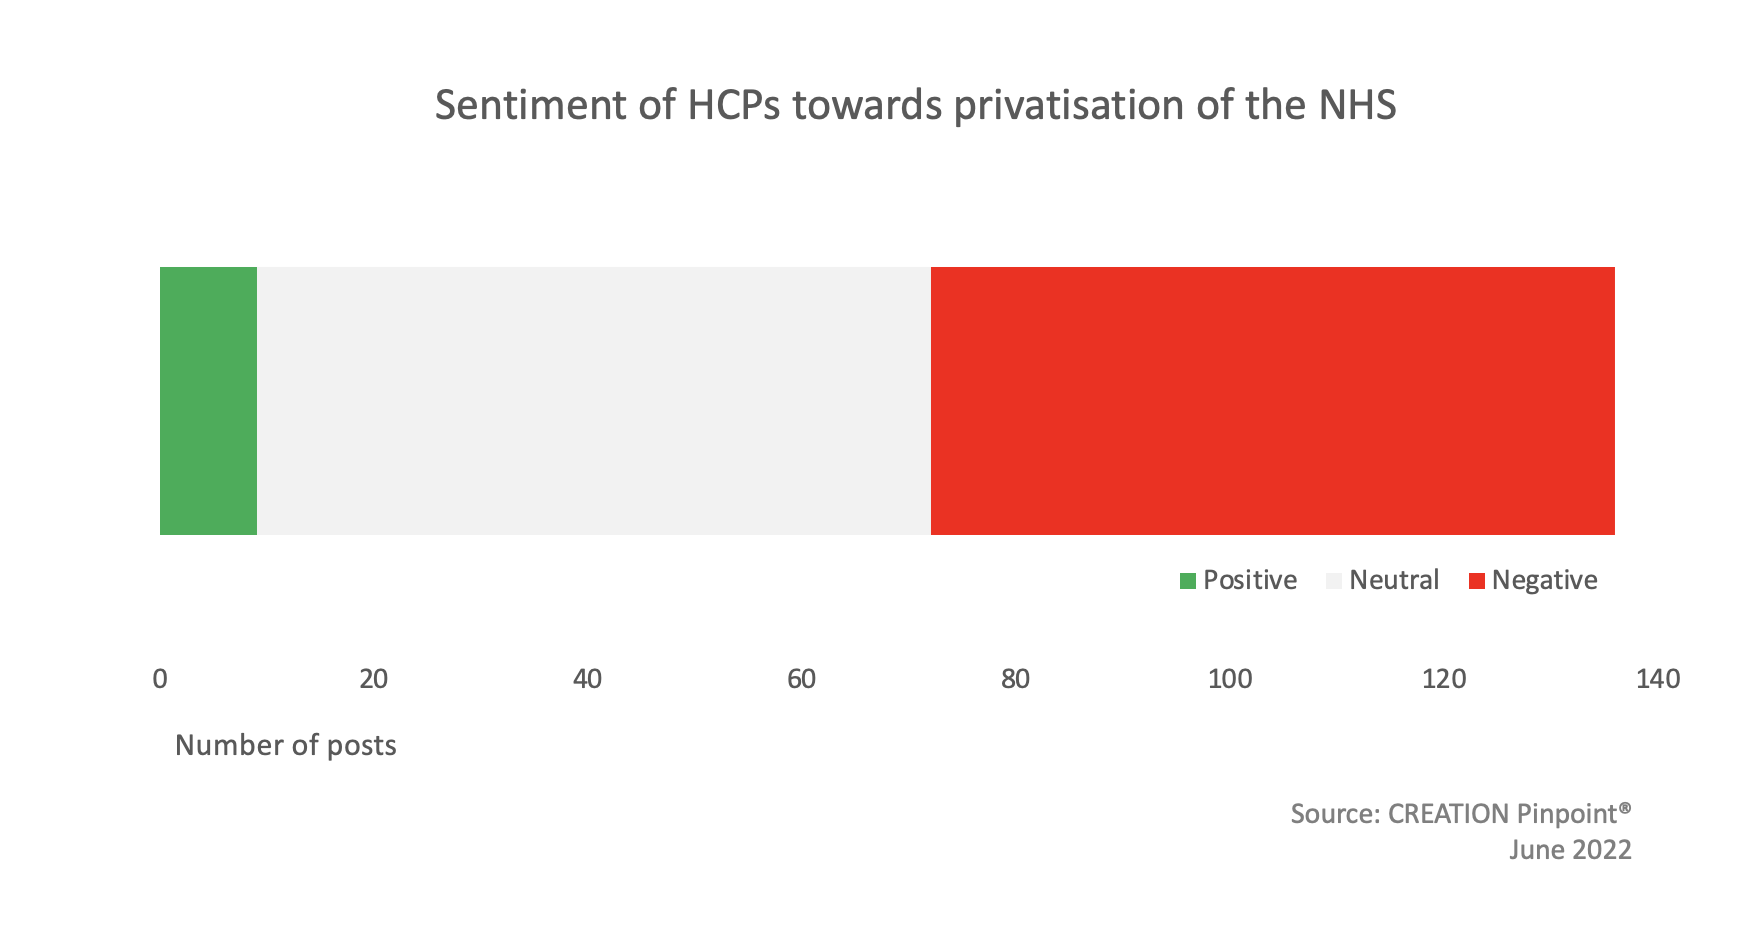 A bar chart showing the sentiment of HCPS towards privatisation pf the NHS